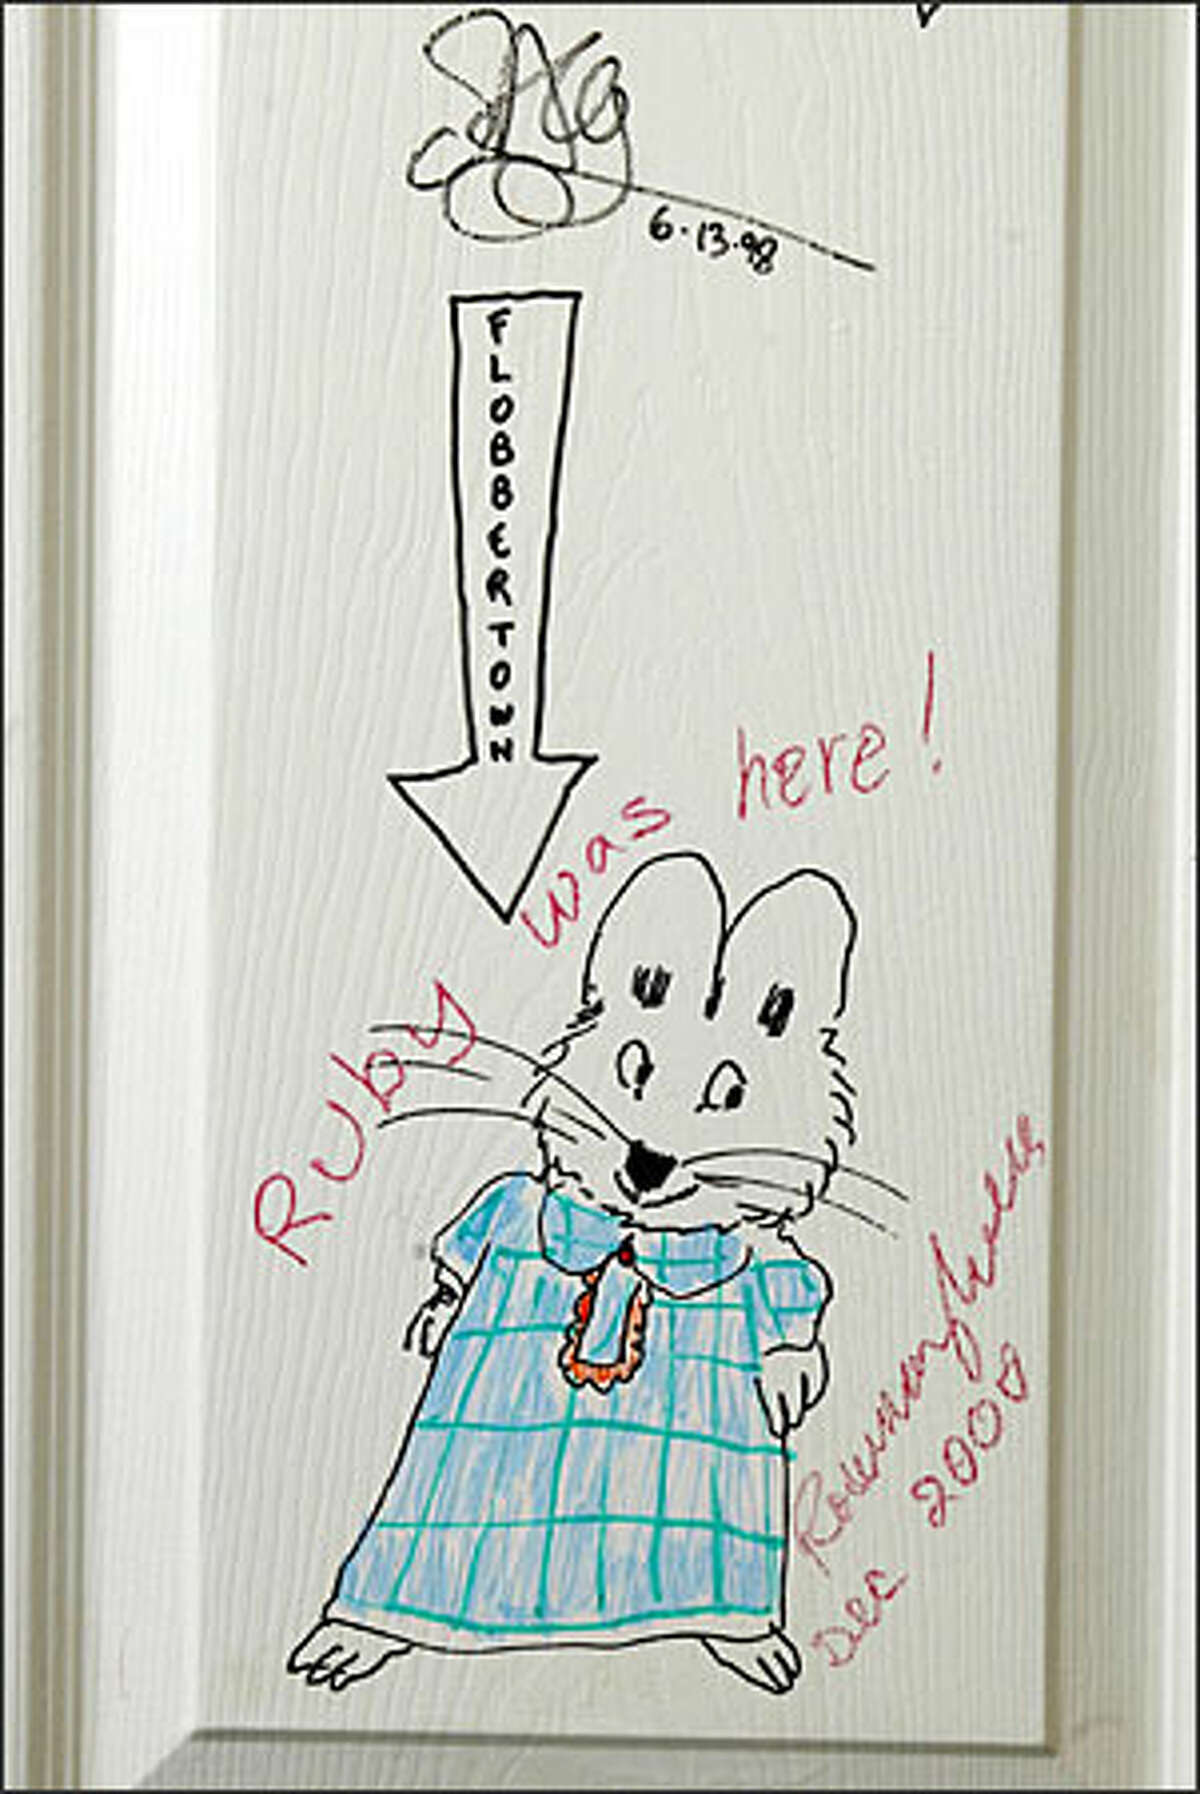 Author/illustrator Rosemary Wells has left her mark at the All For Kids store.